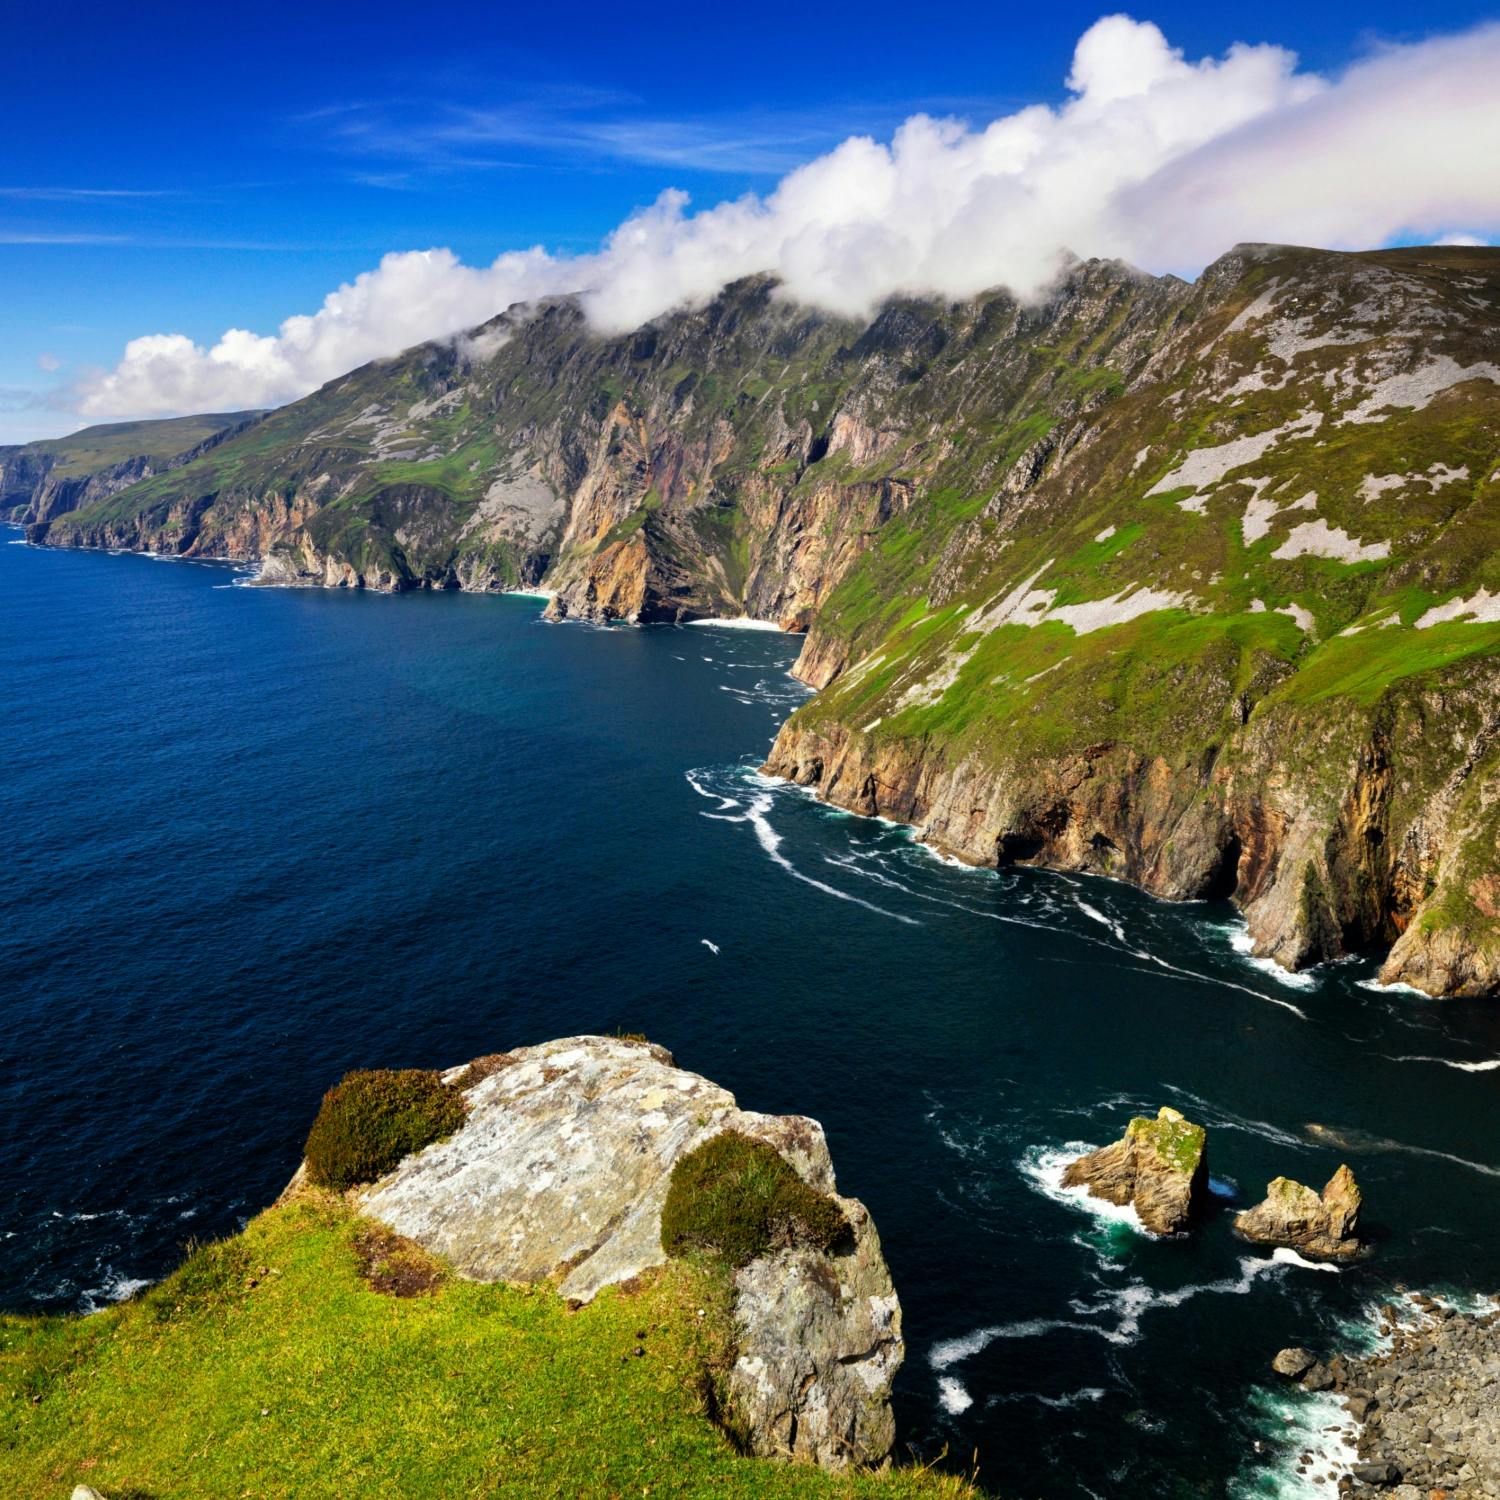 Body Recovered From Sliabh Liag